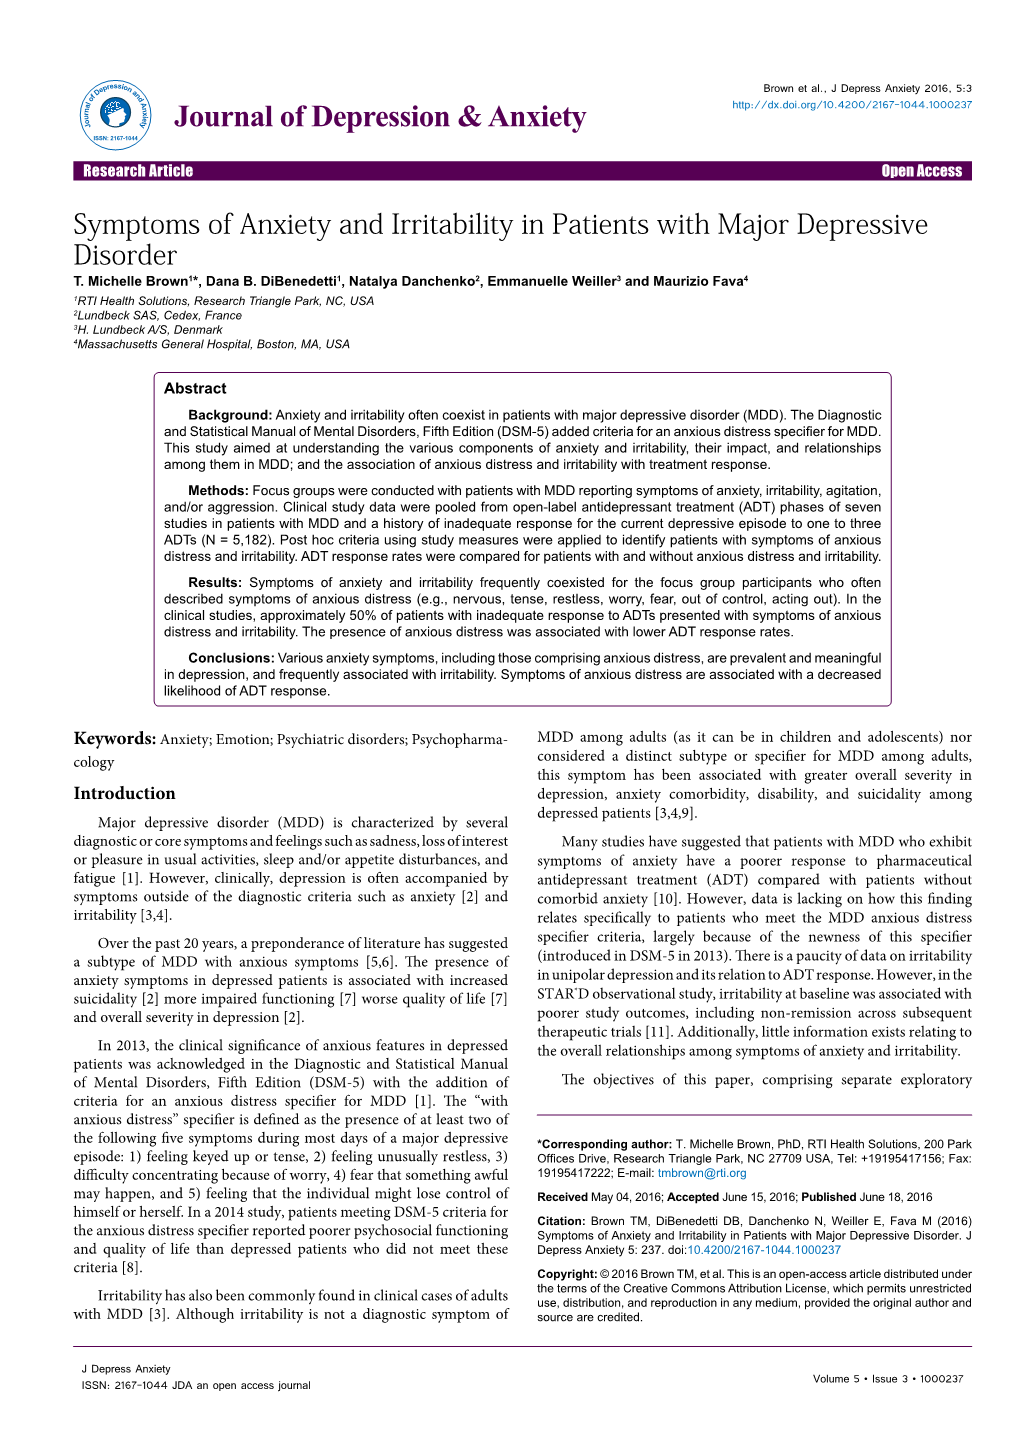 Symptoms of Anxiety and Irritability in Patients with Major Depressive Disorder T